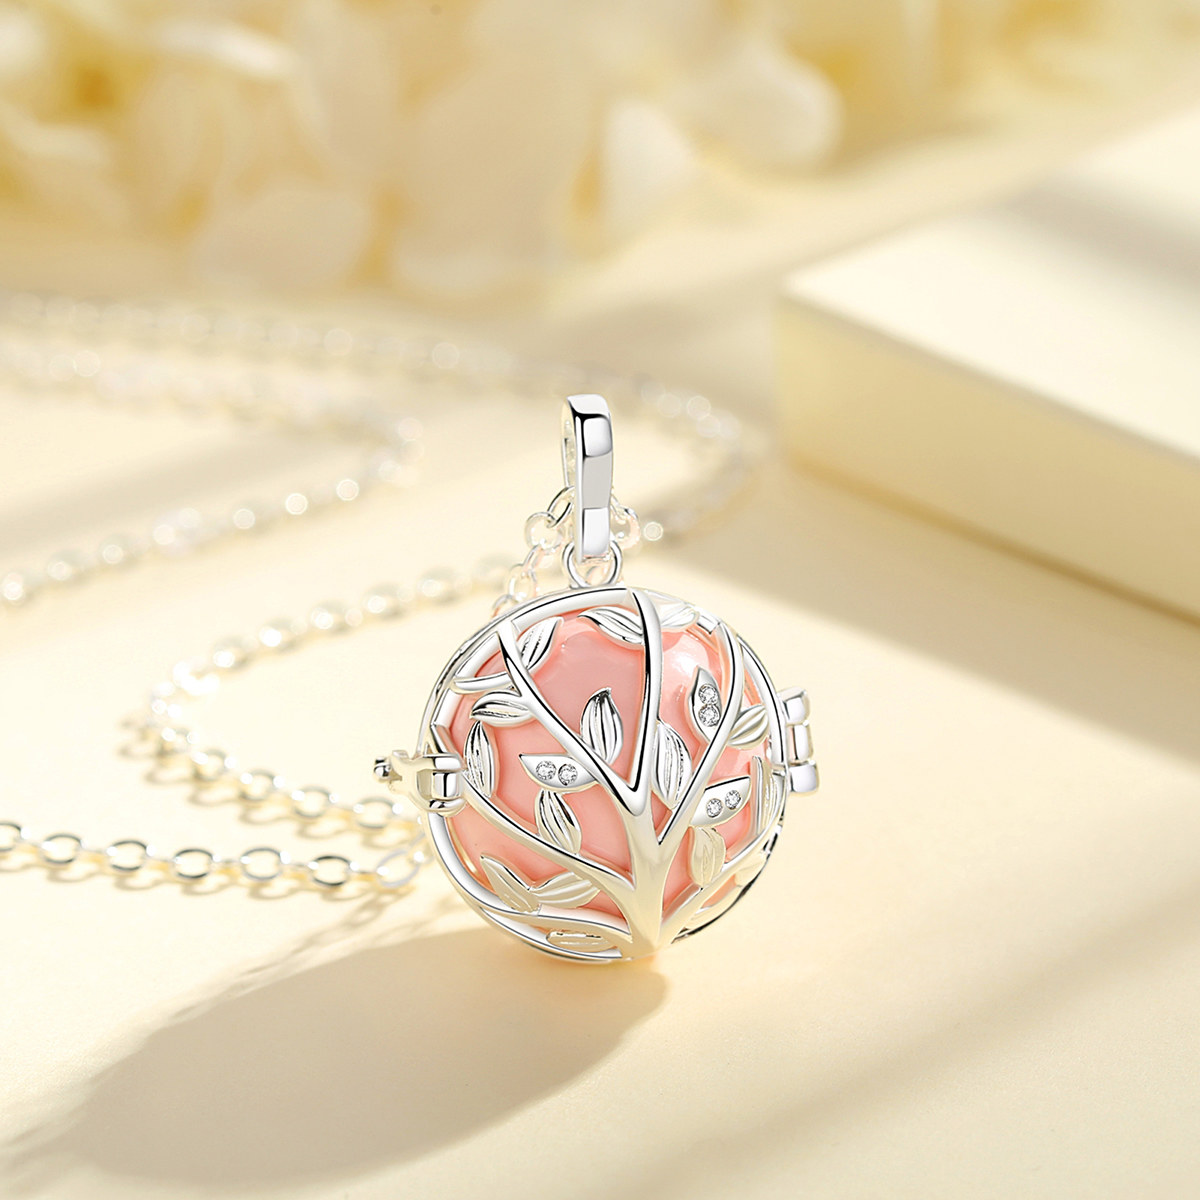 Eudora 20mm fashion Crystal Tree Cage Harmony Ball Chime Bell Pendant Angel Caller Bola Necklace for Baby Pregnancy Jewelry K168